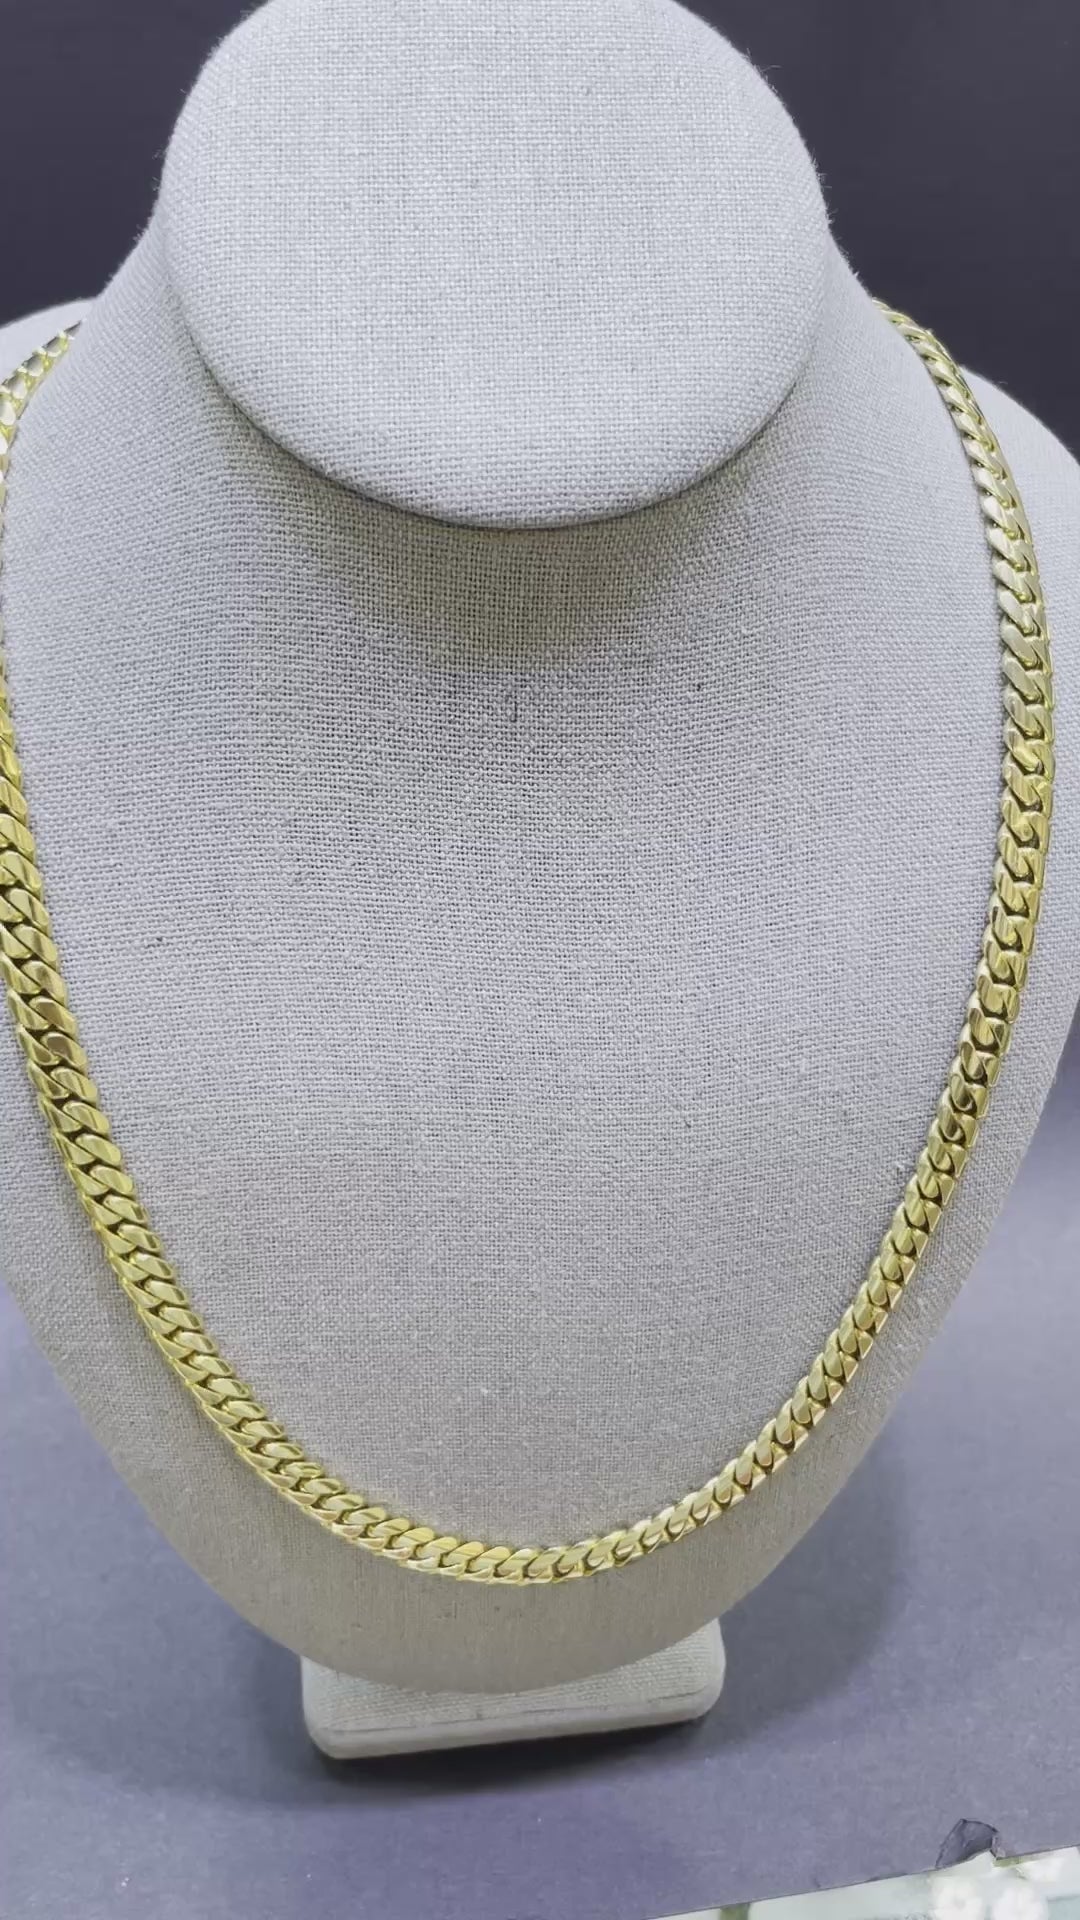 14k 150 gram Heavy Cuban Link Chain 8mm and 28 inches